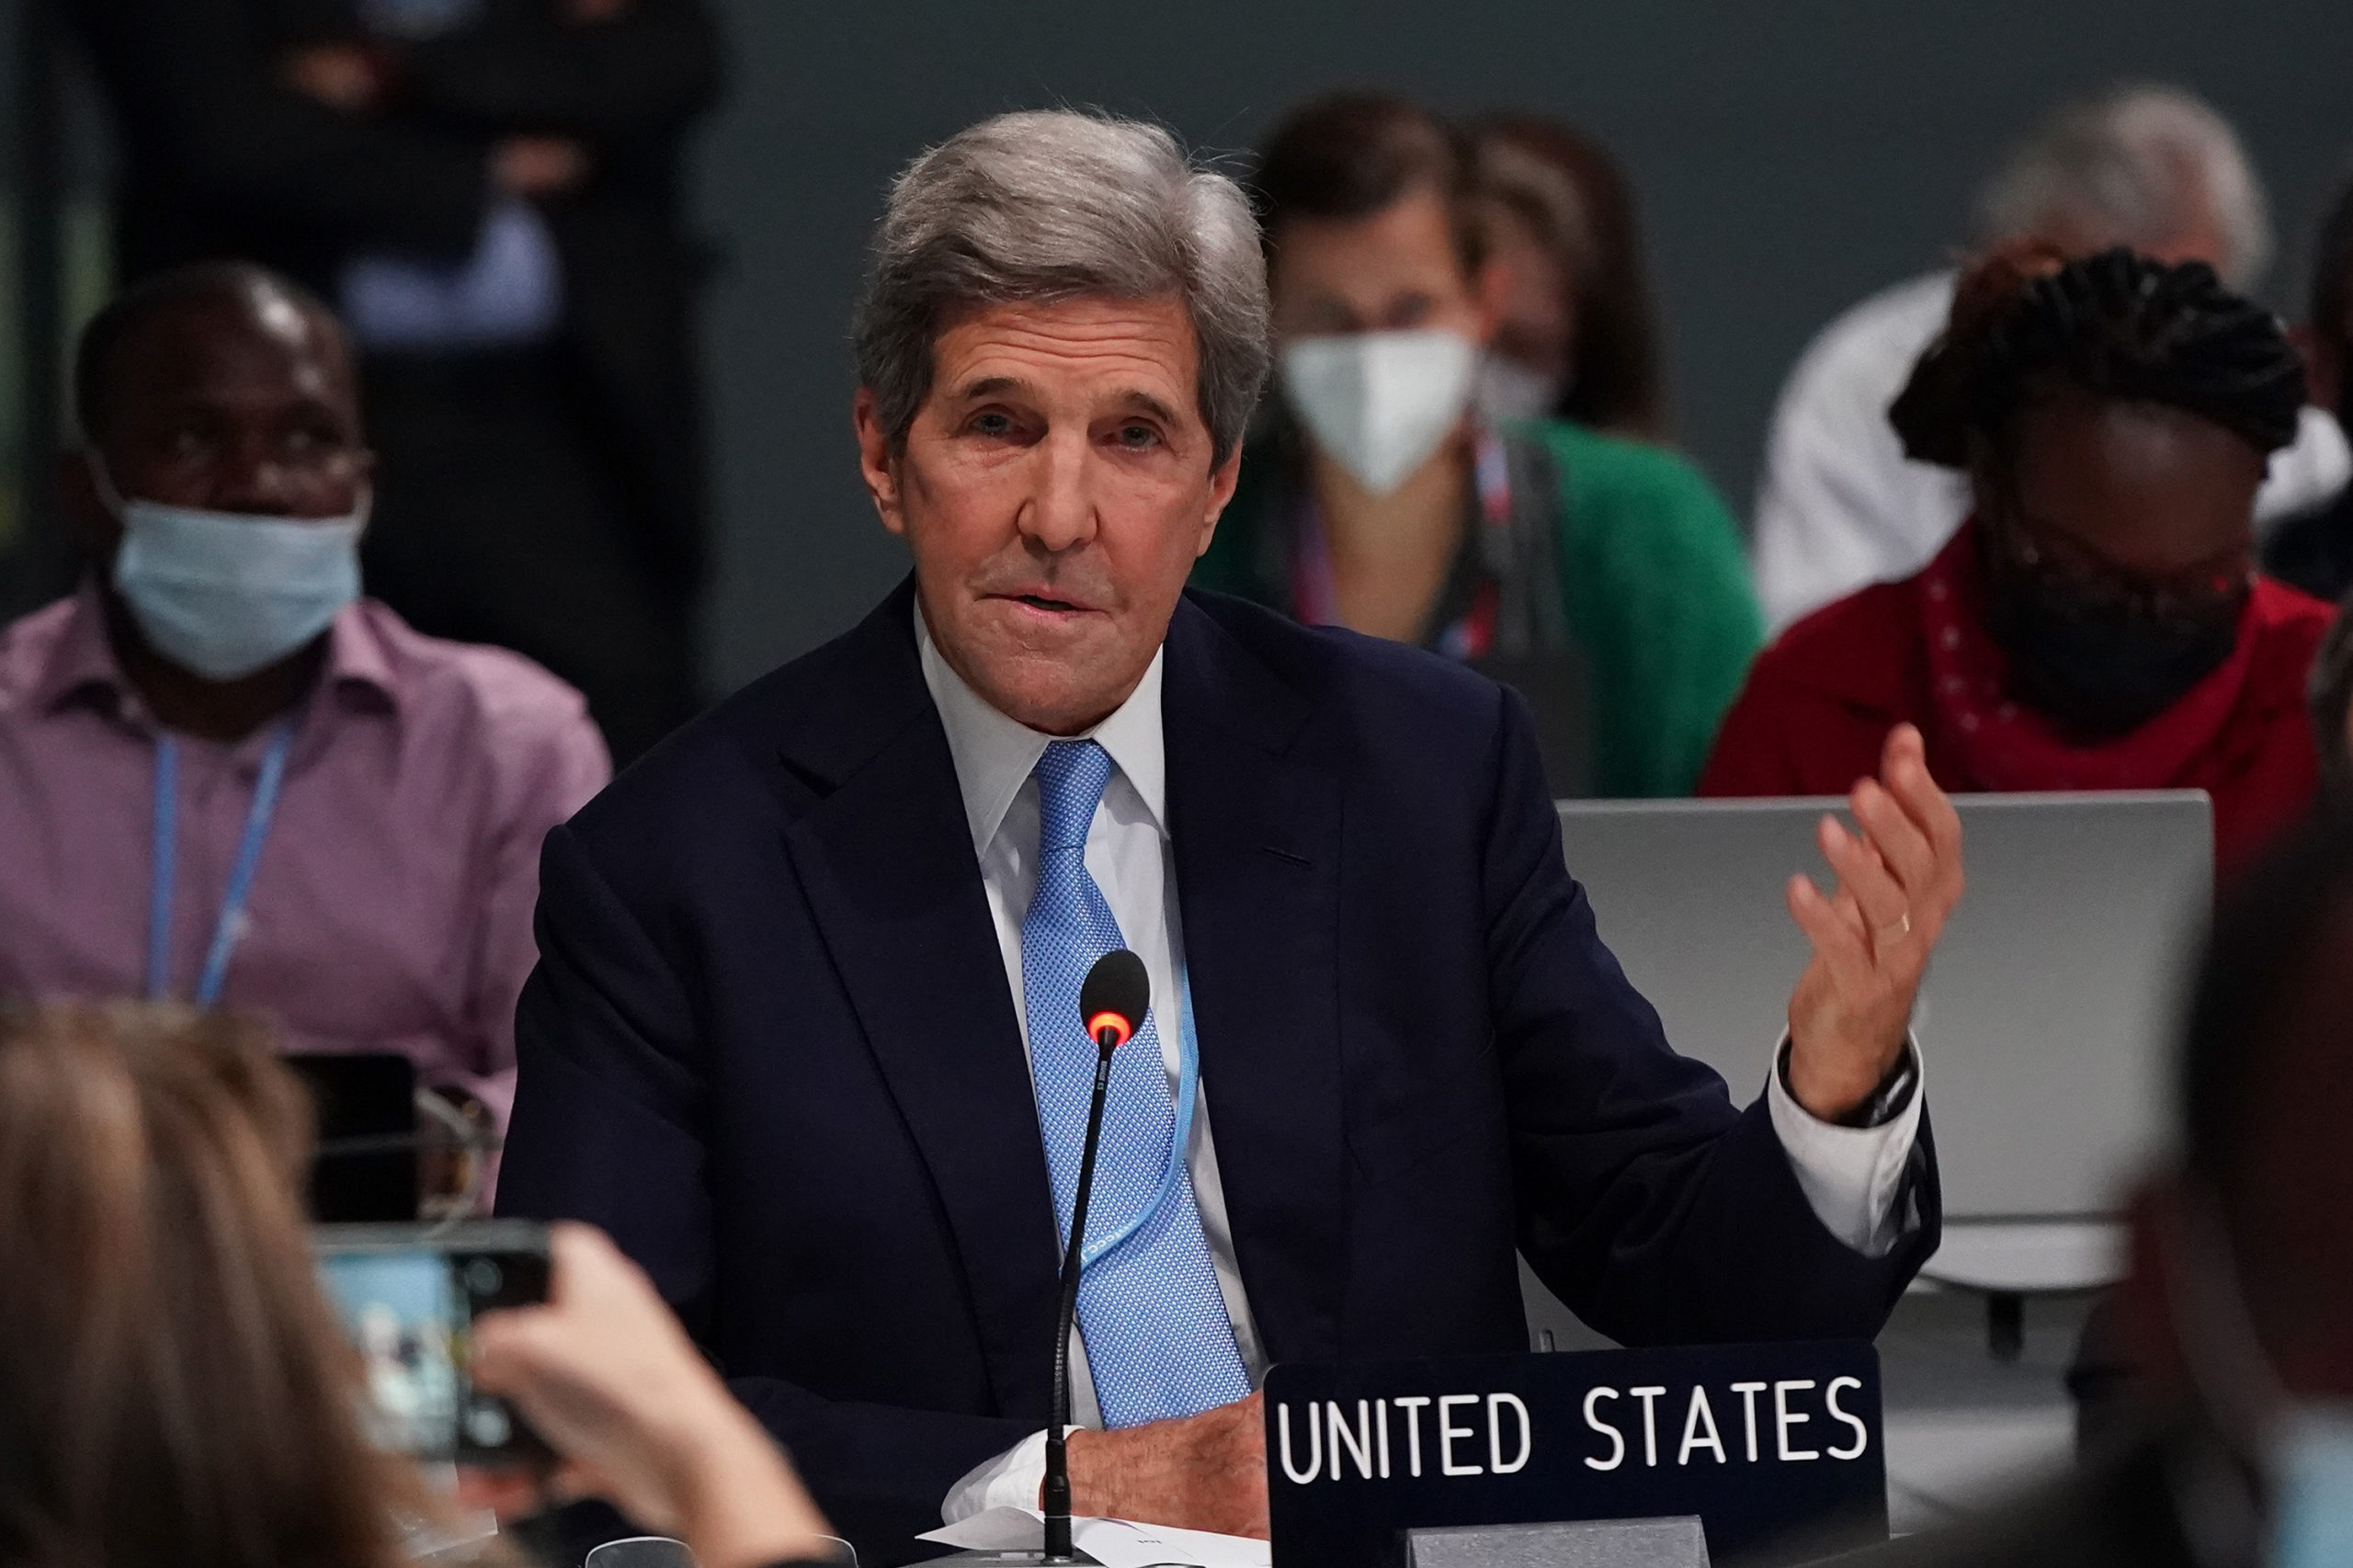 U.S. special climate envoy John Kerry speaks during the COP26 climate conference on Nov. 12 in Glasgow, Scotland. (Ian Forsyth/Getty Images)